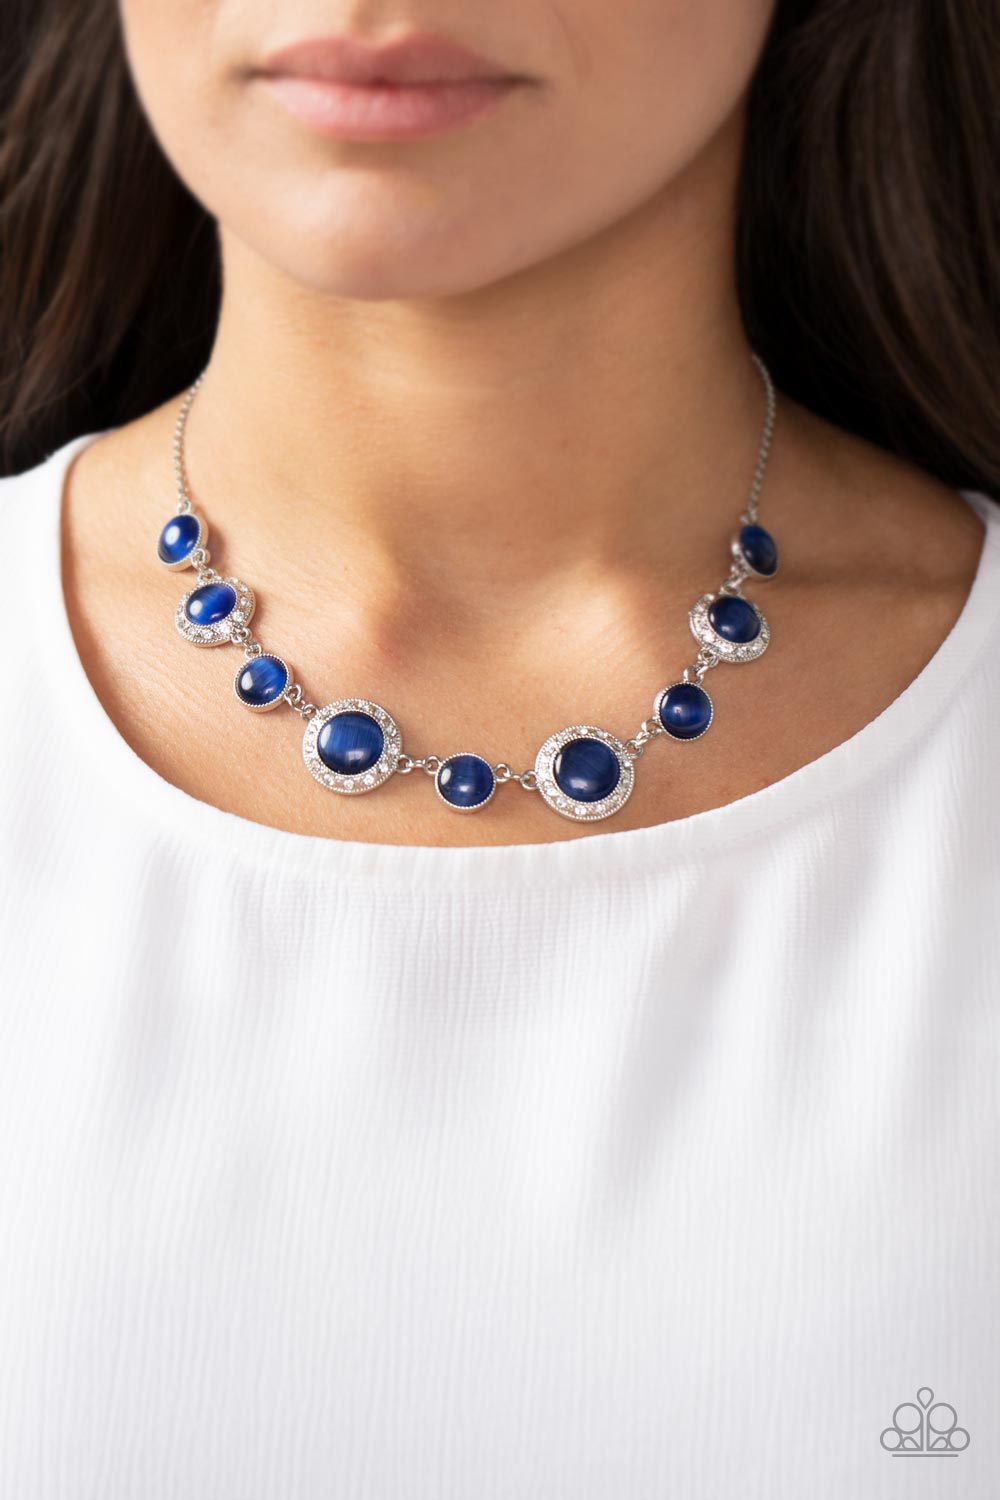 Too Good to BEAM True - Blue Necklace - Sharon's Southern Bling